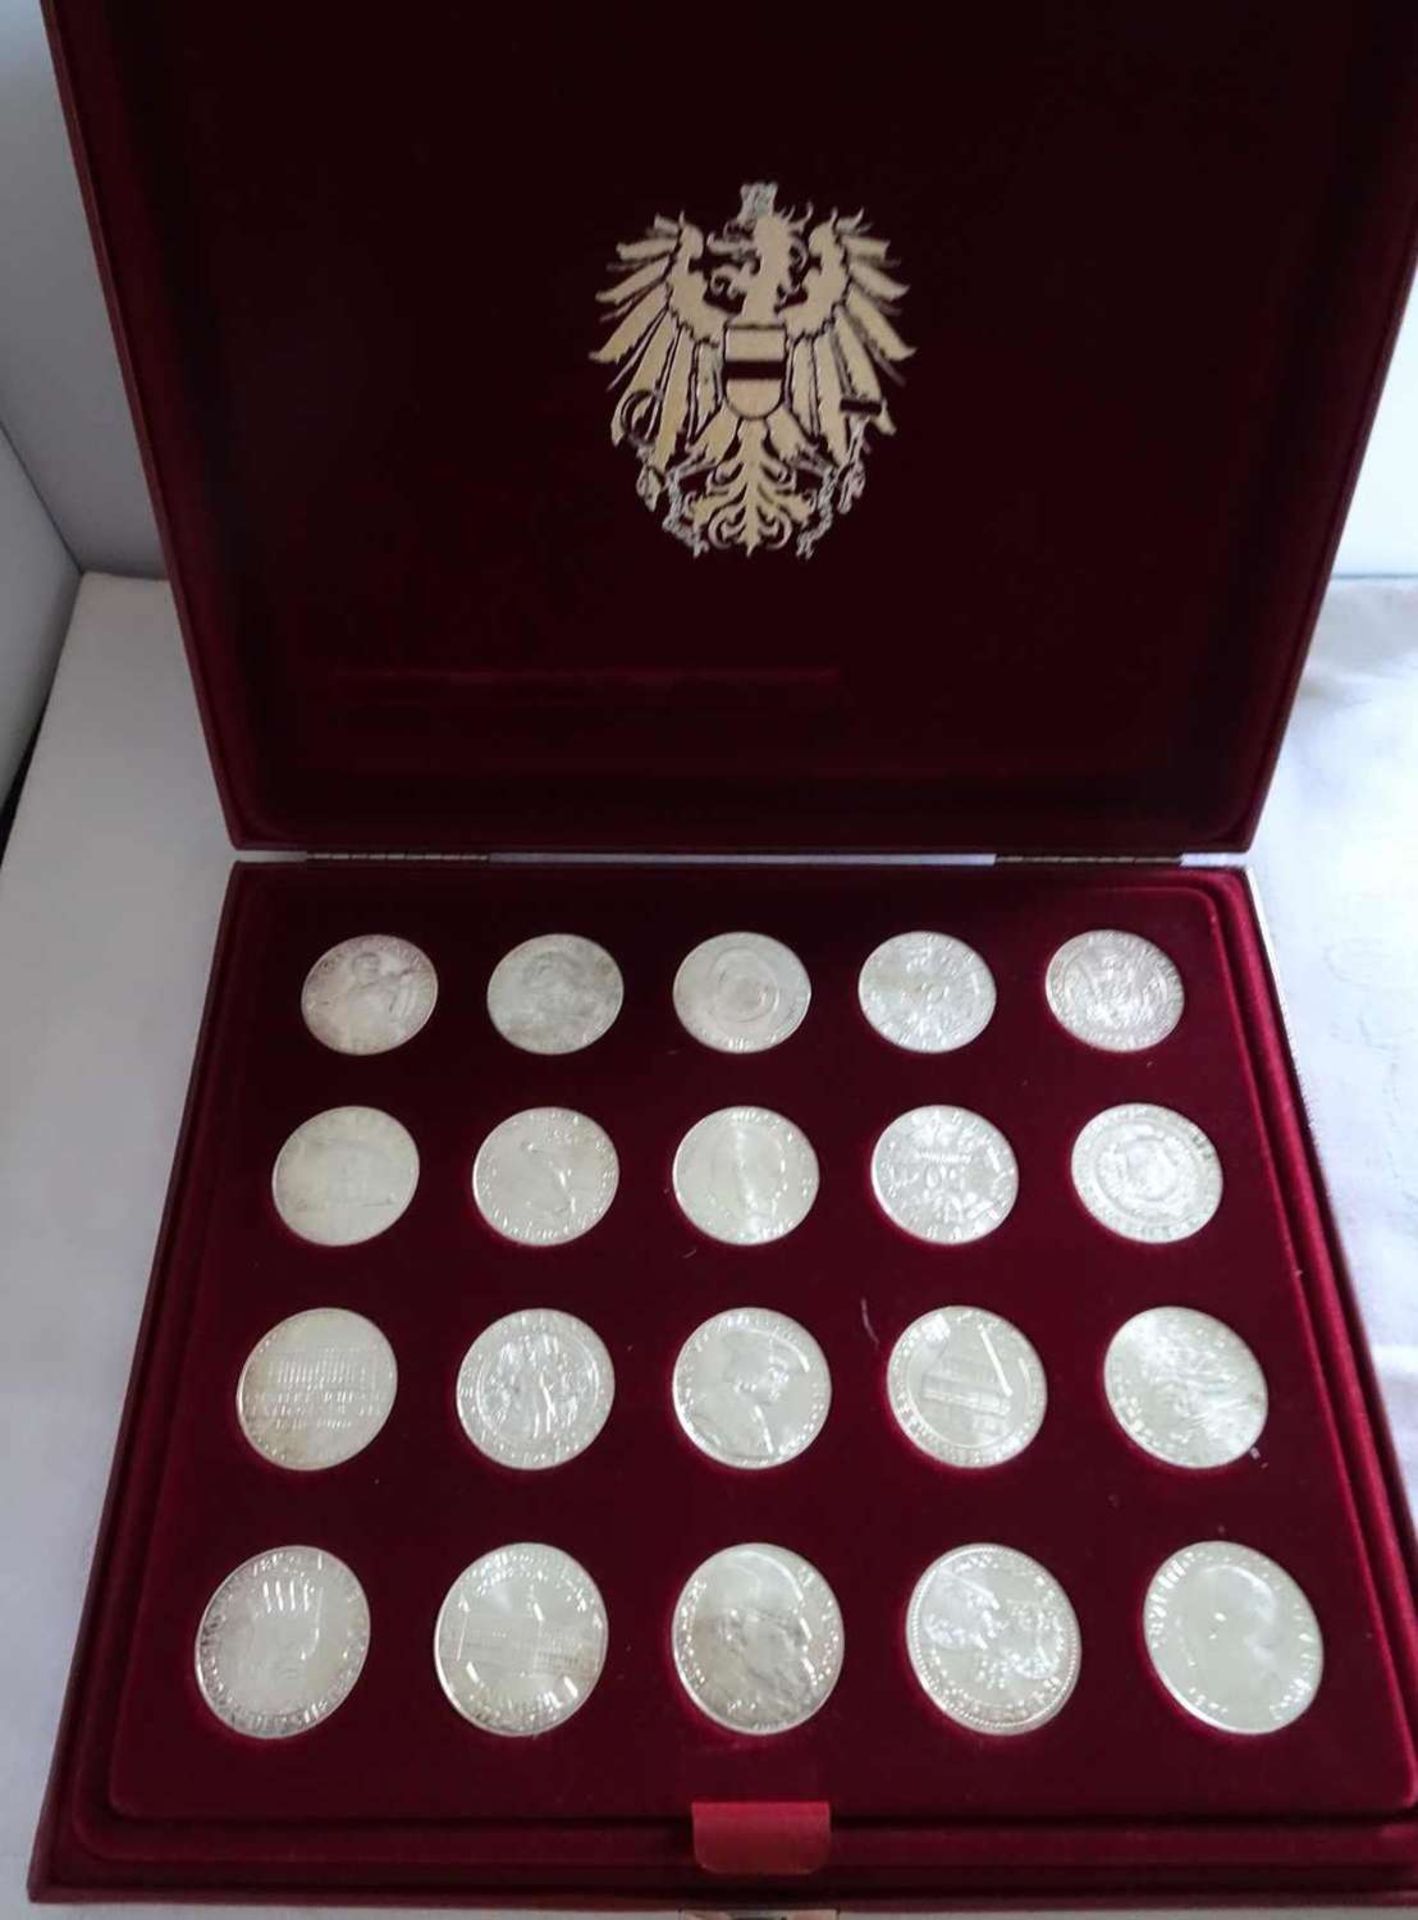 Lot of silver commemorative coins Austria, consisting of 19x 25 schillings, 21x 50 shillings, 6x 100